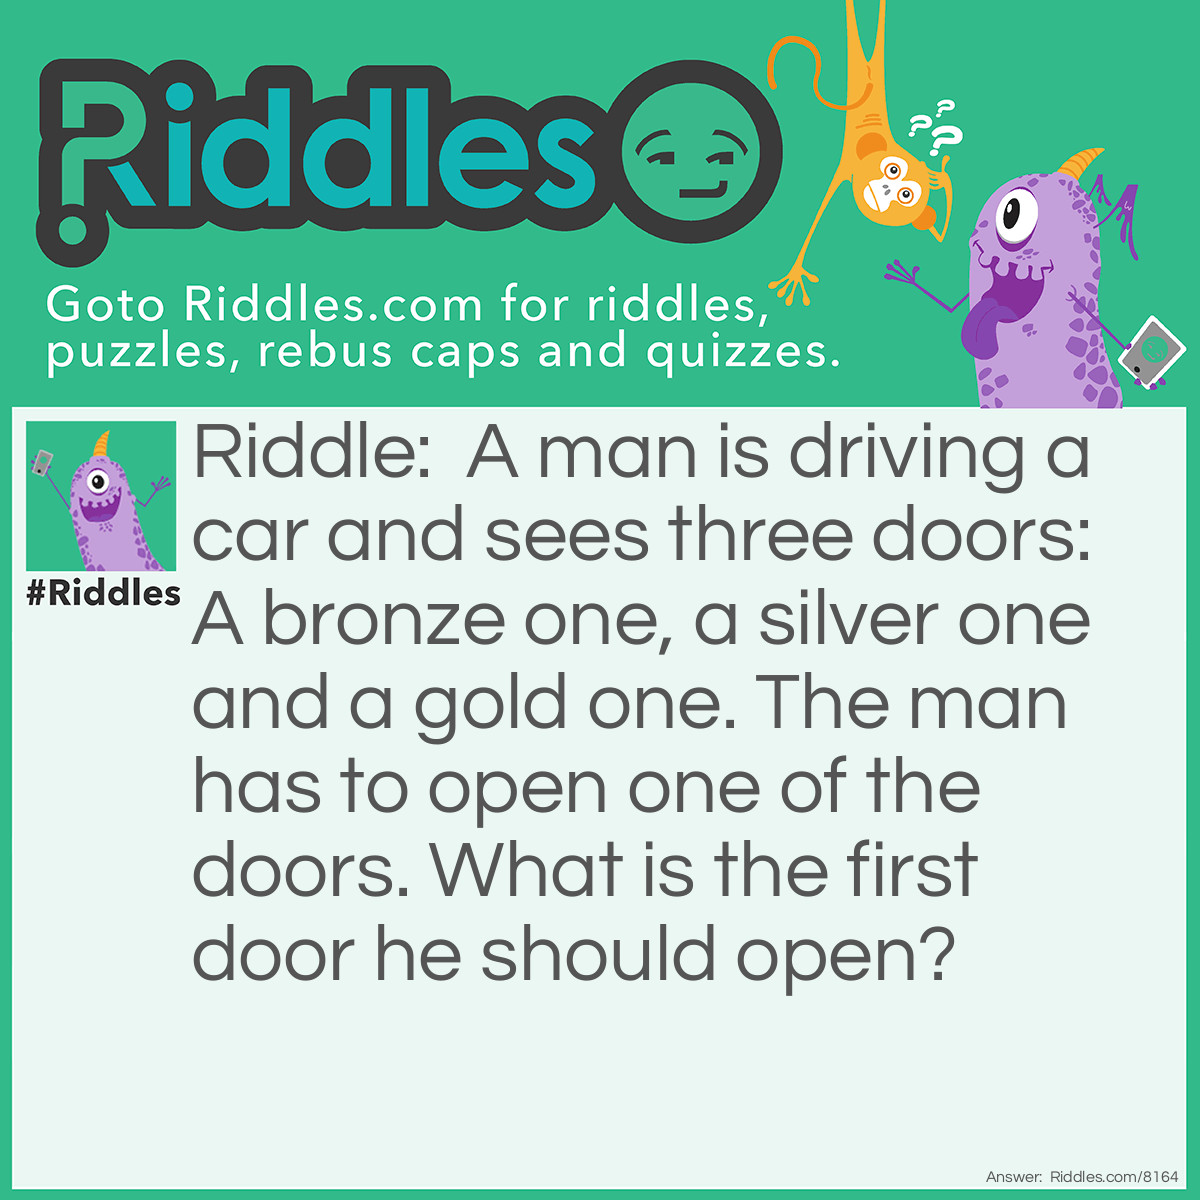 Riddle: A man is driving a car and sees three doors: A bronze one, a silver one and a gold one. The man has to open one of the doors. What is the first door he should open? Answer: His car door.